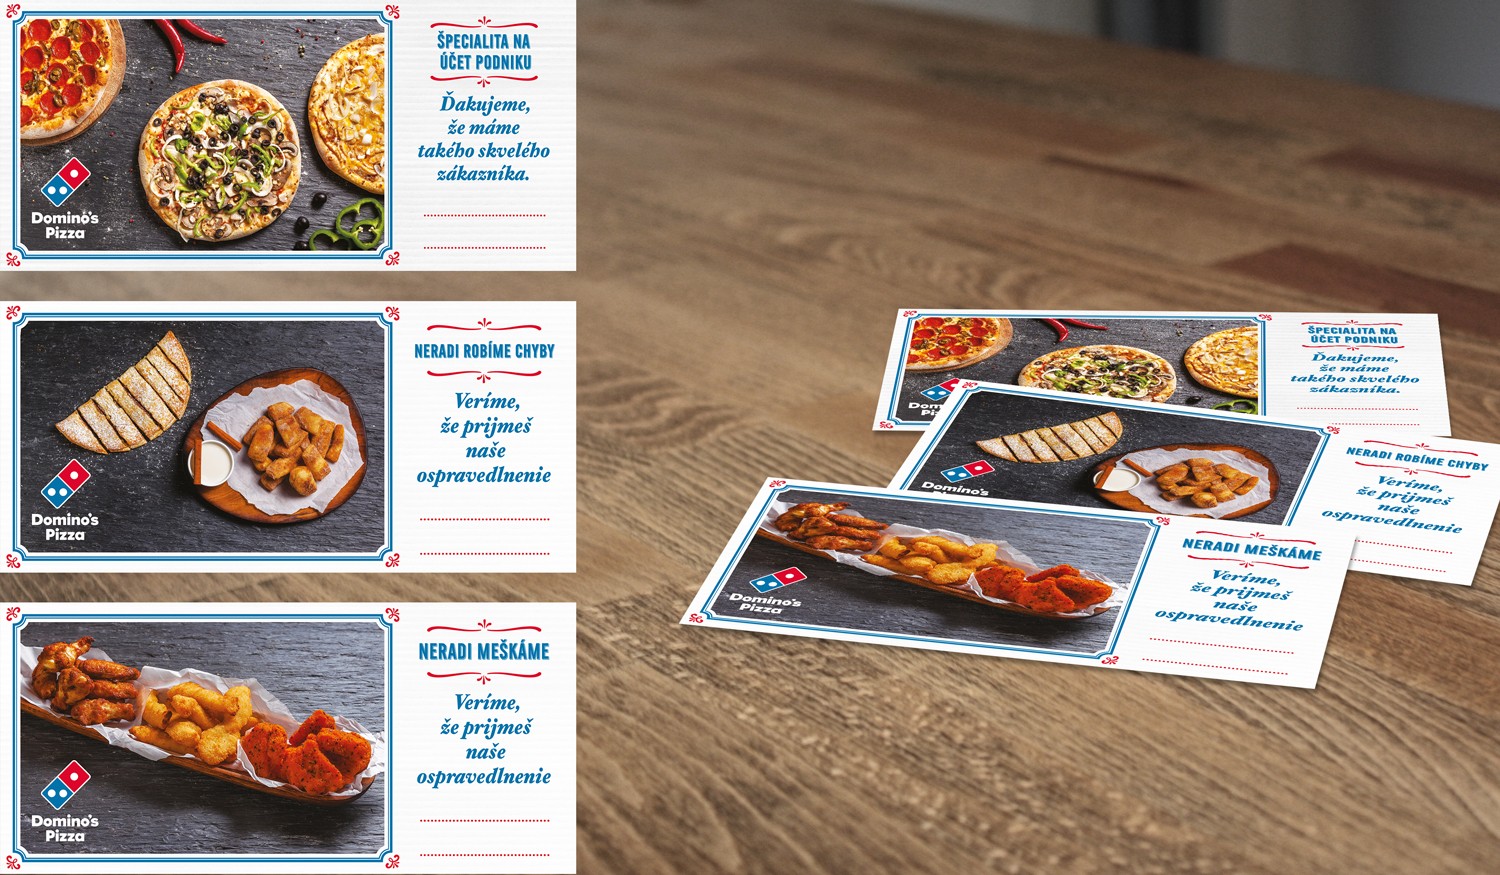 Domino's Pizza Sorry and Late cards